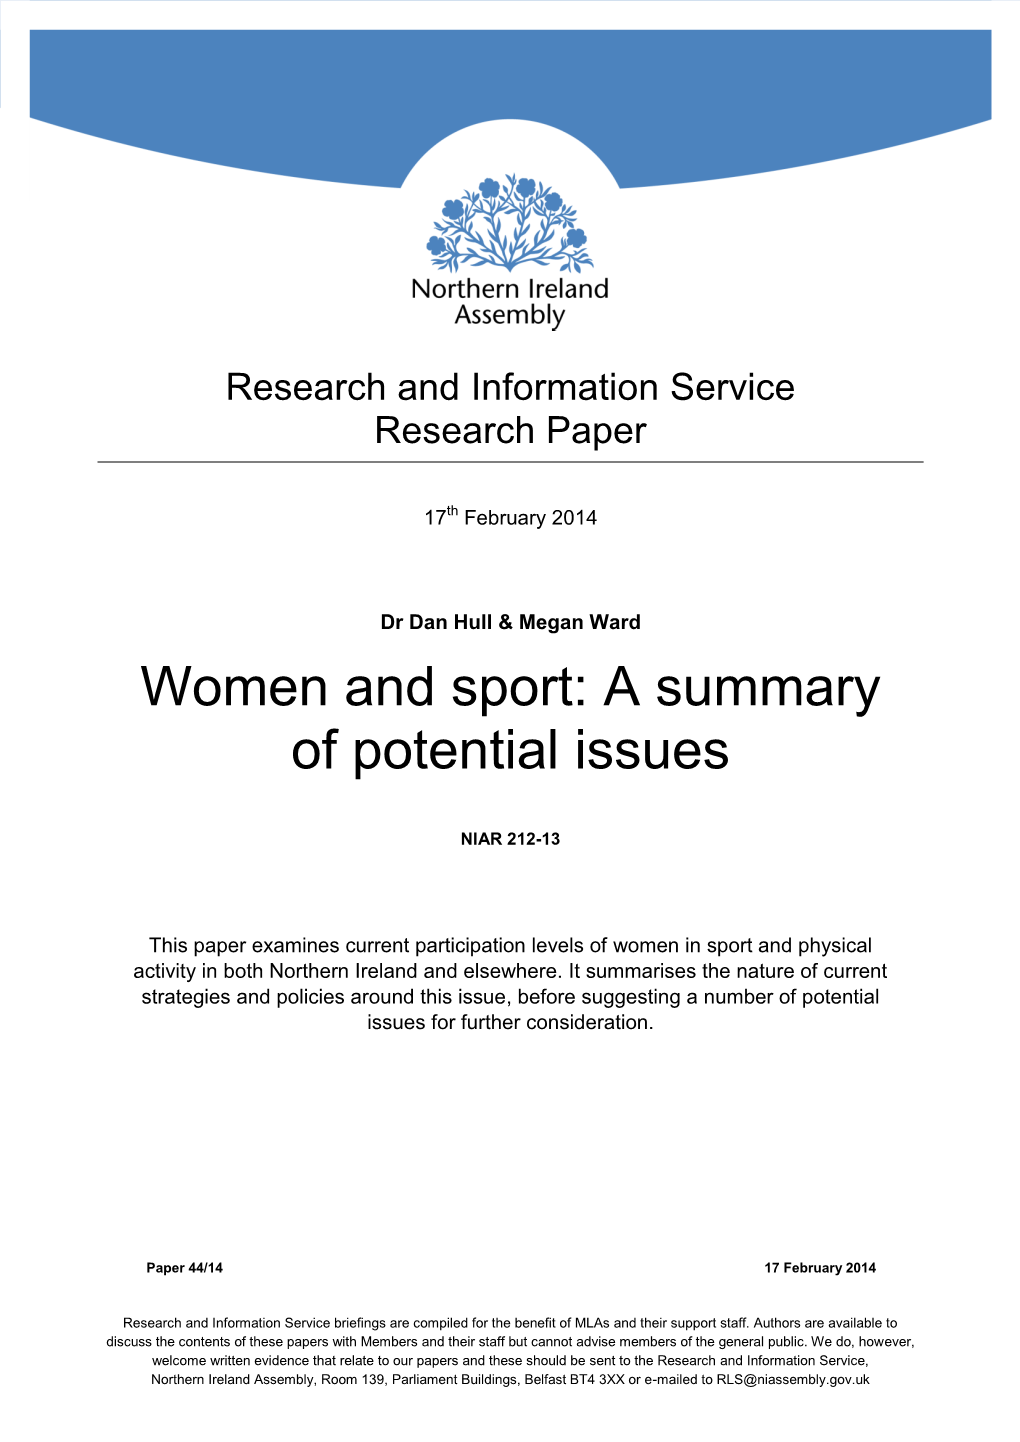 Women and Sport: a Summary of Potential Issues